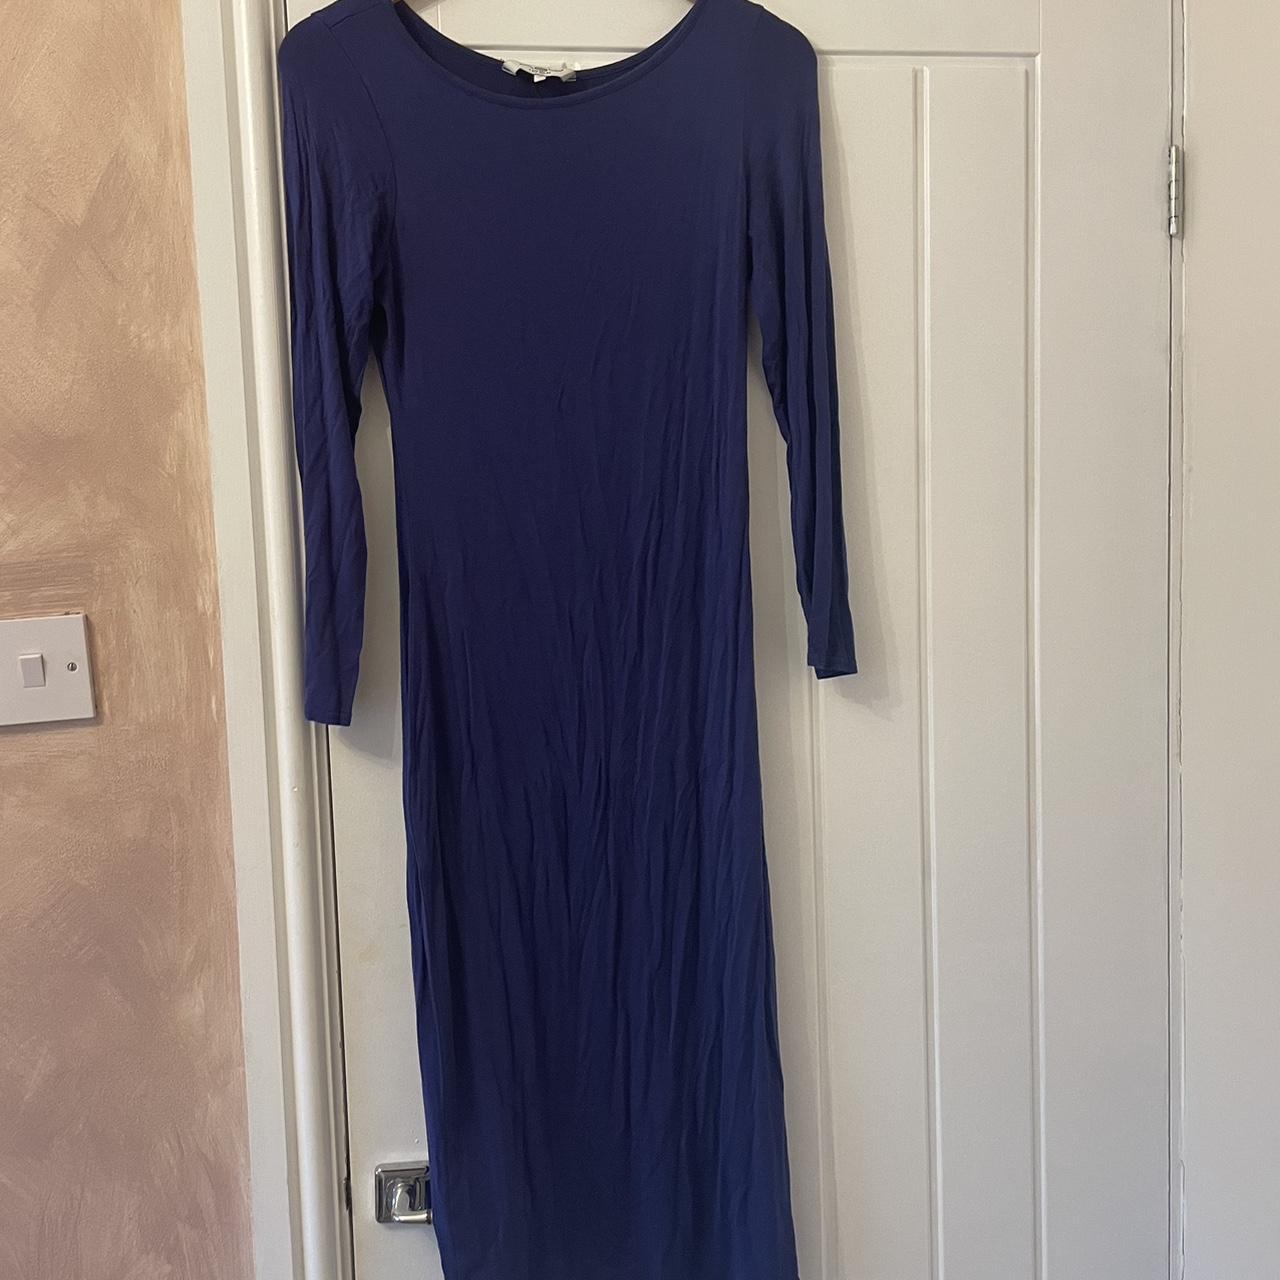 Bodycon midi dress with long sleeves Size 14 but... - Depop